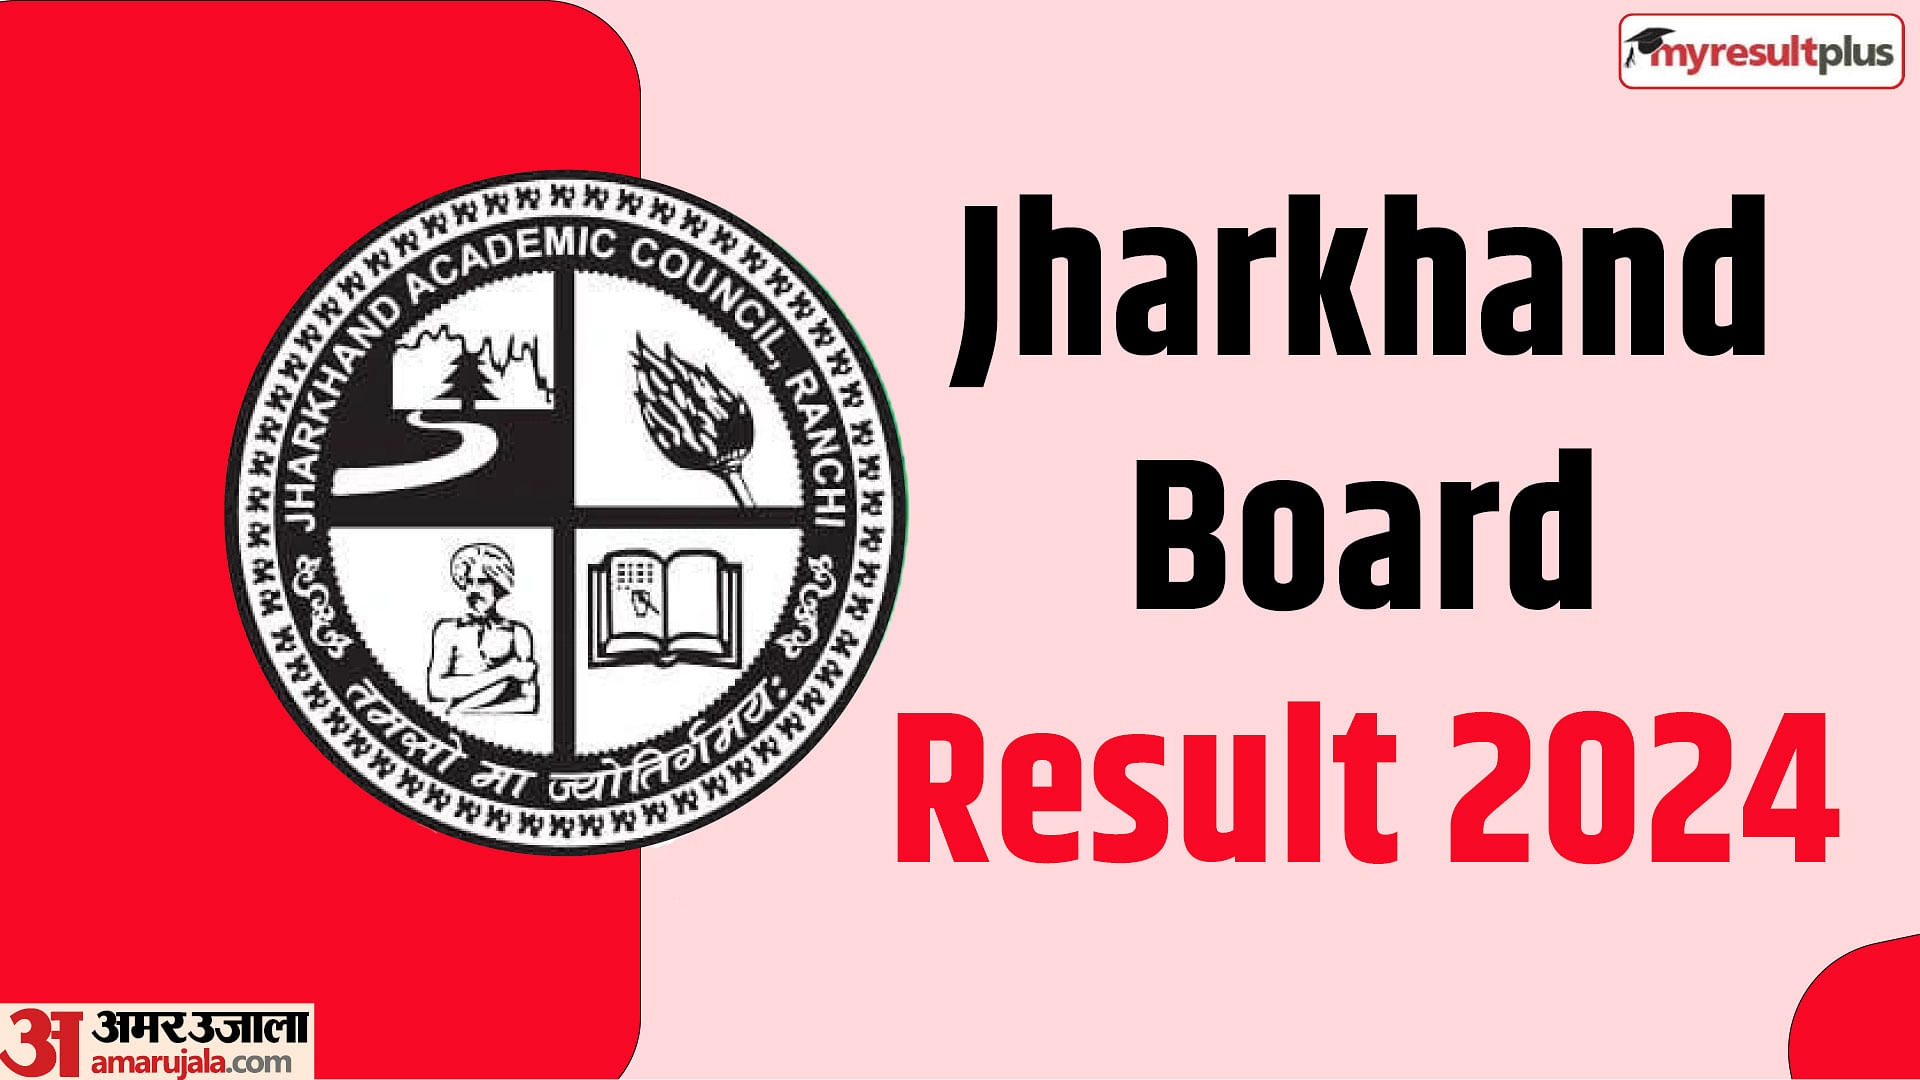 Jharkhand board result 2024 class 10 releasing today, Check all updates here